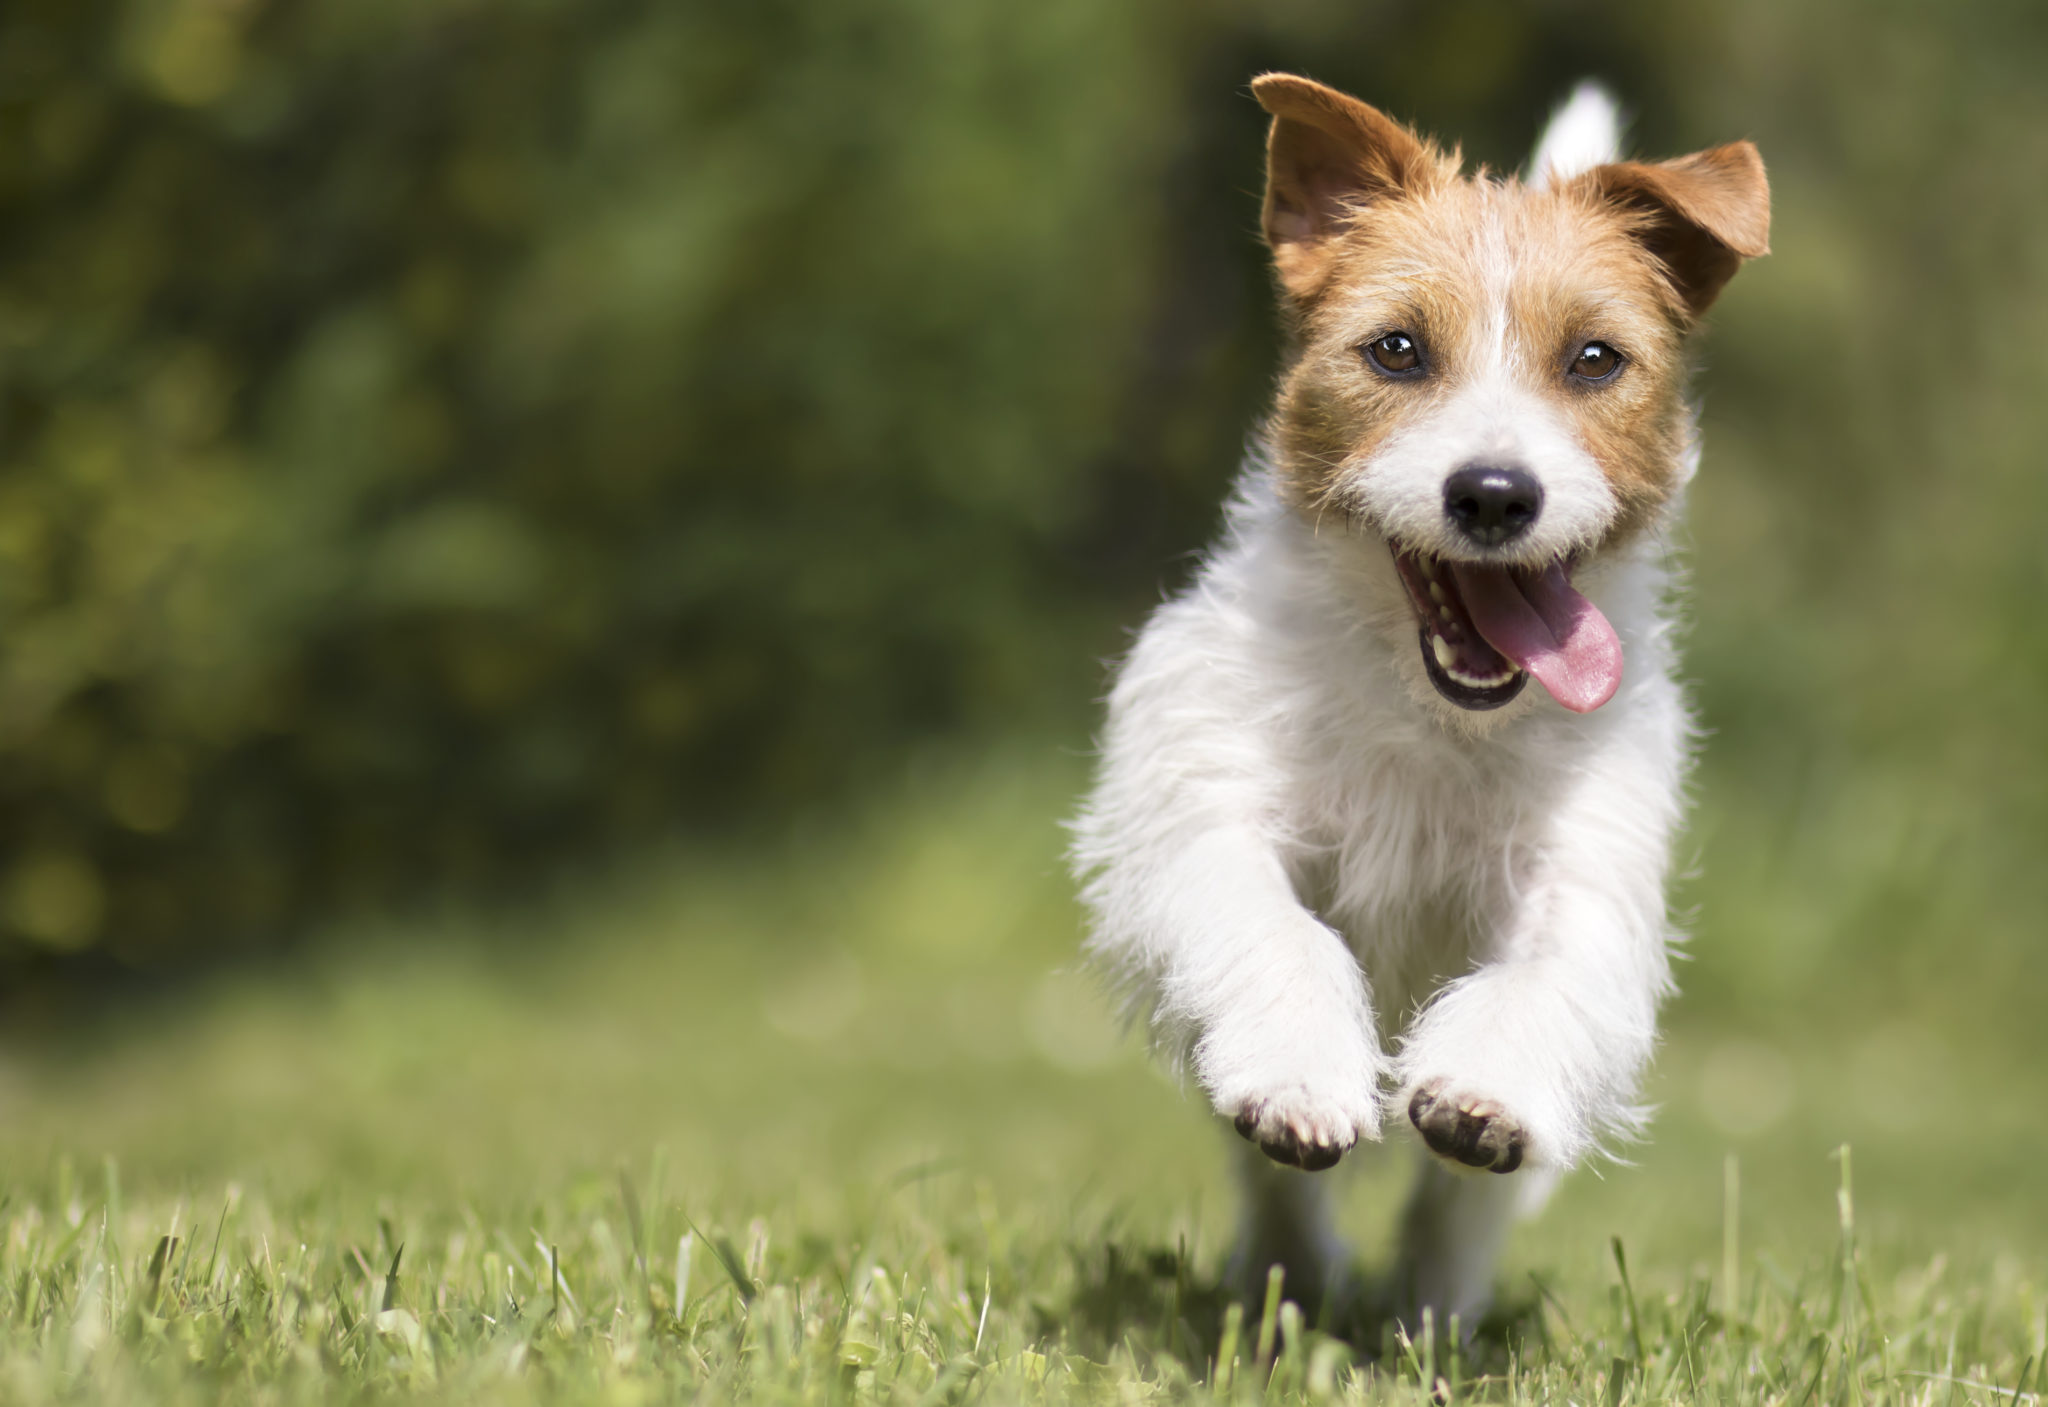 Funny playful happy smiling pet dog puppy running, jumping in the grass